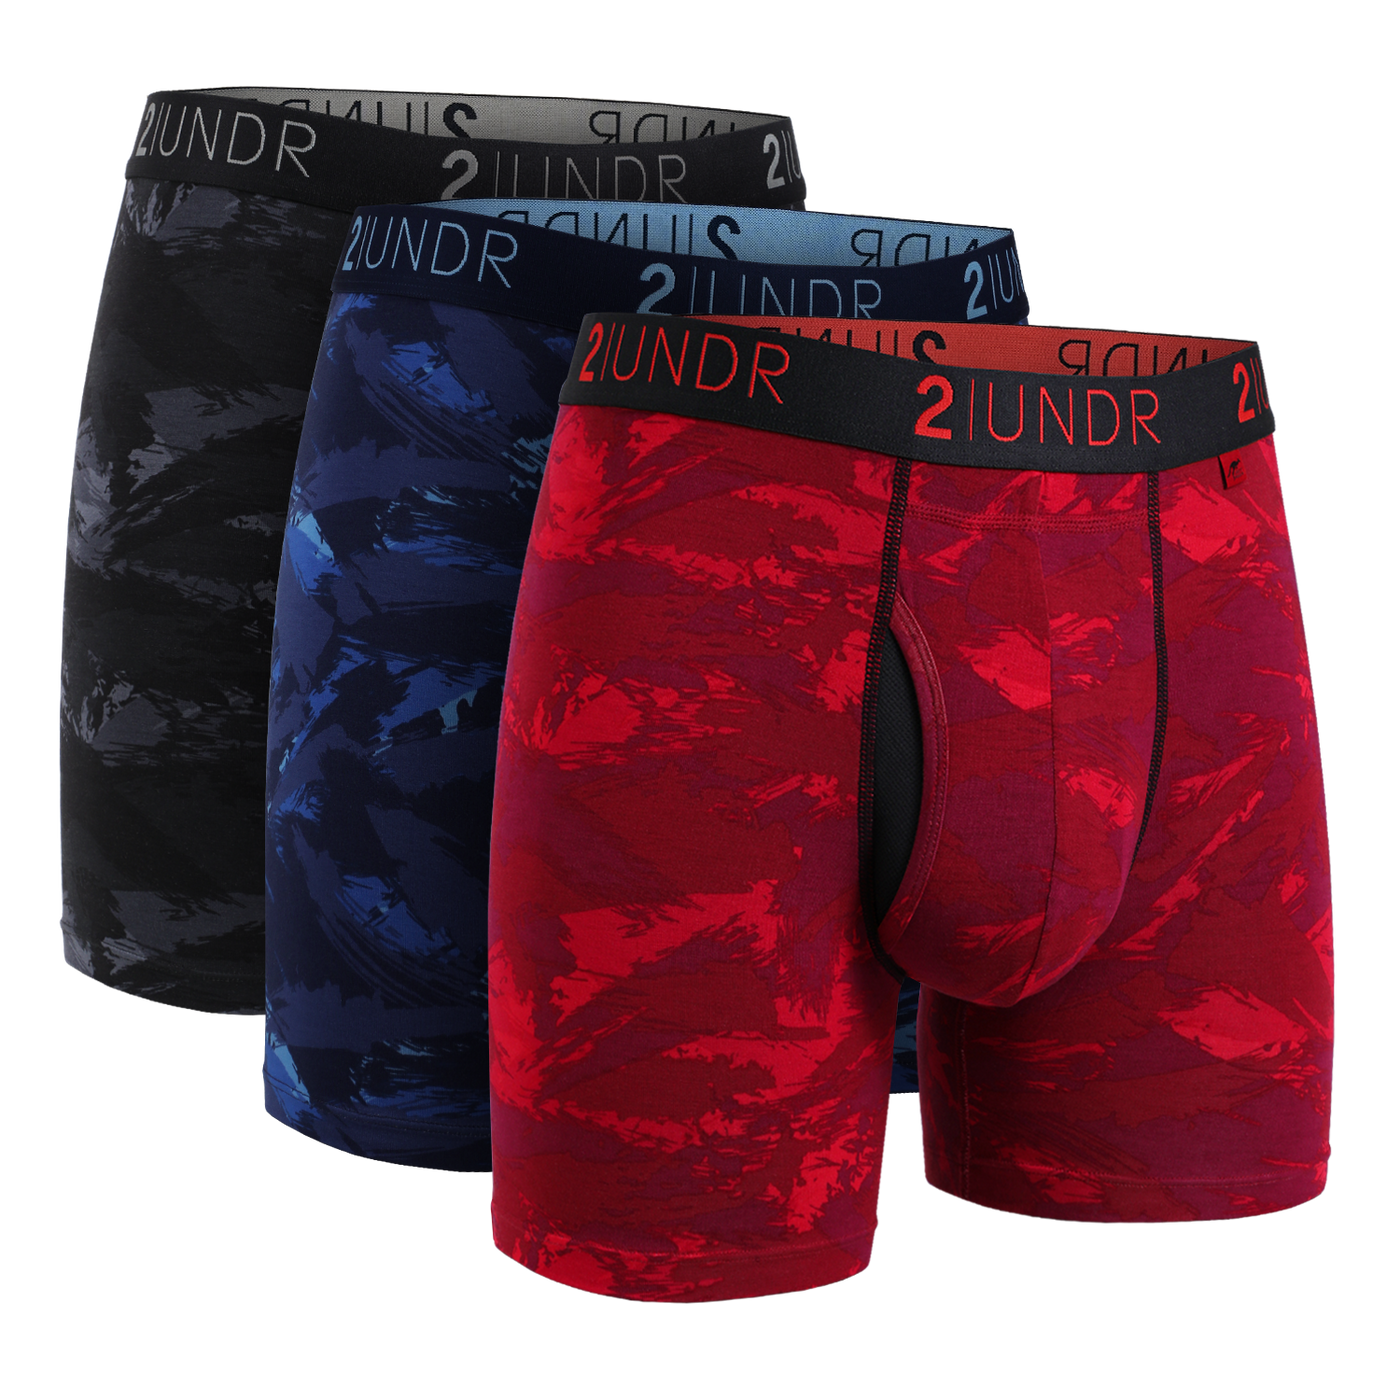 Swing Shift Boxer Brief 3 Pack Boxset - Black-Blue-Red Storm